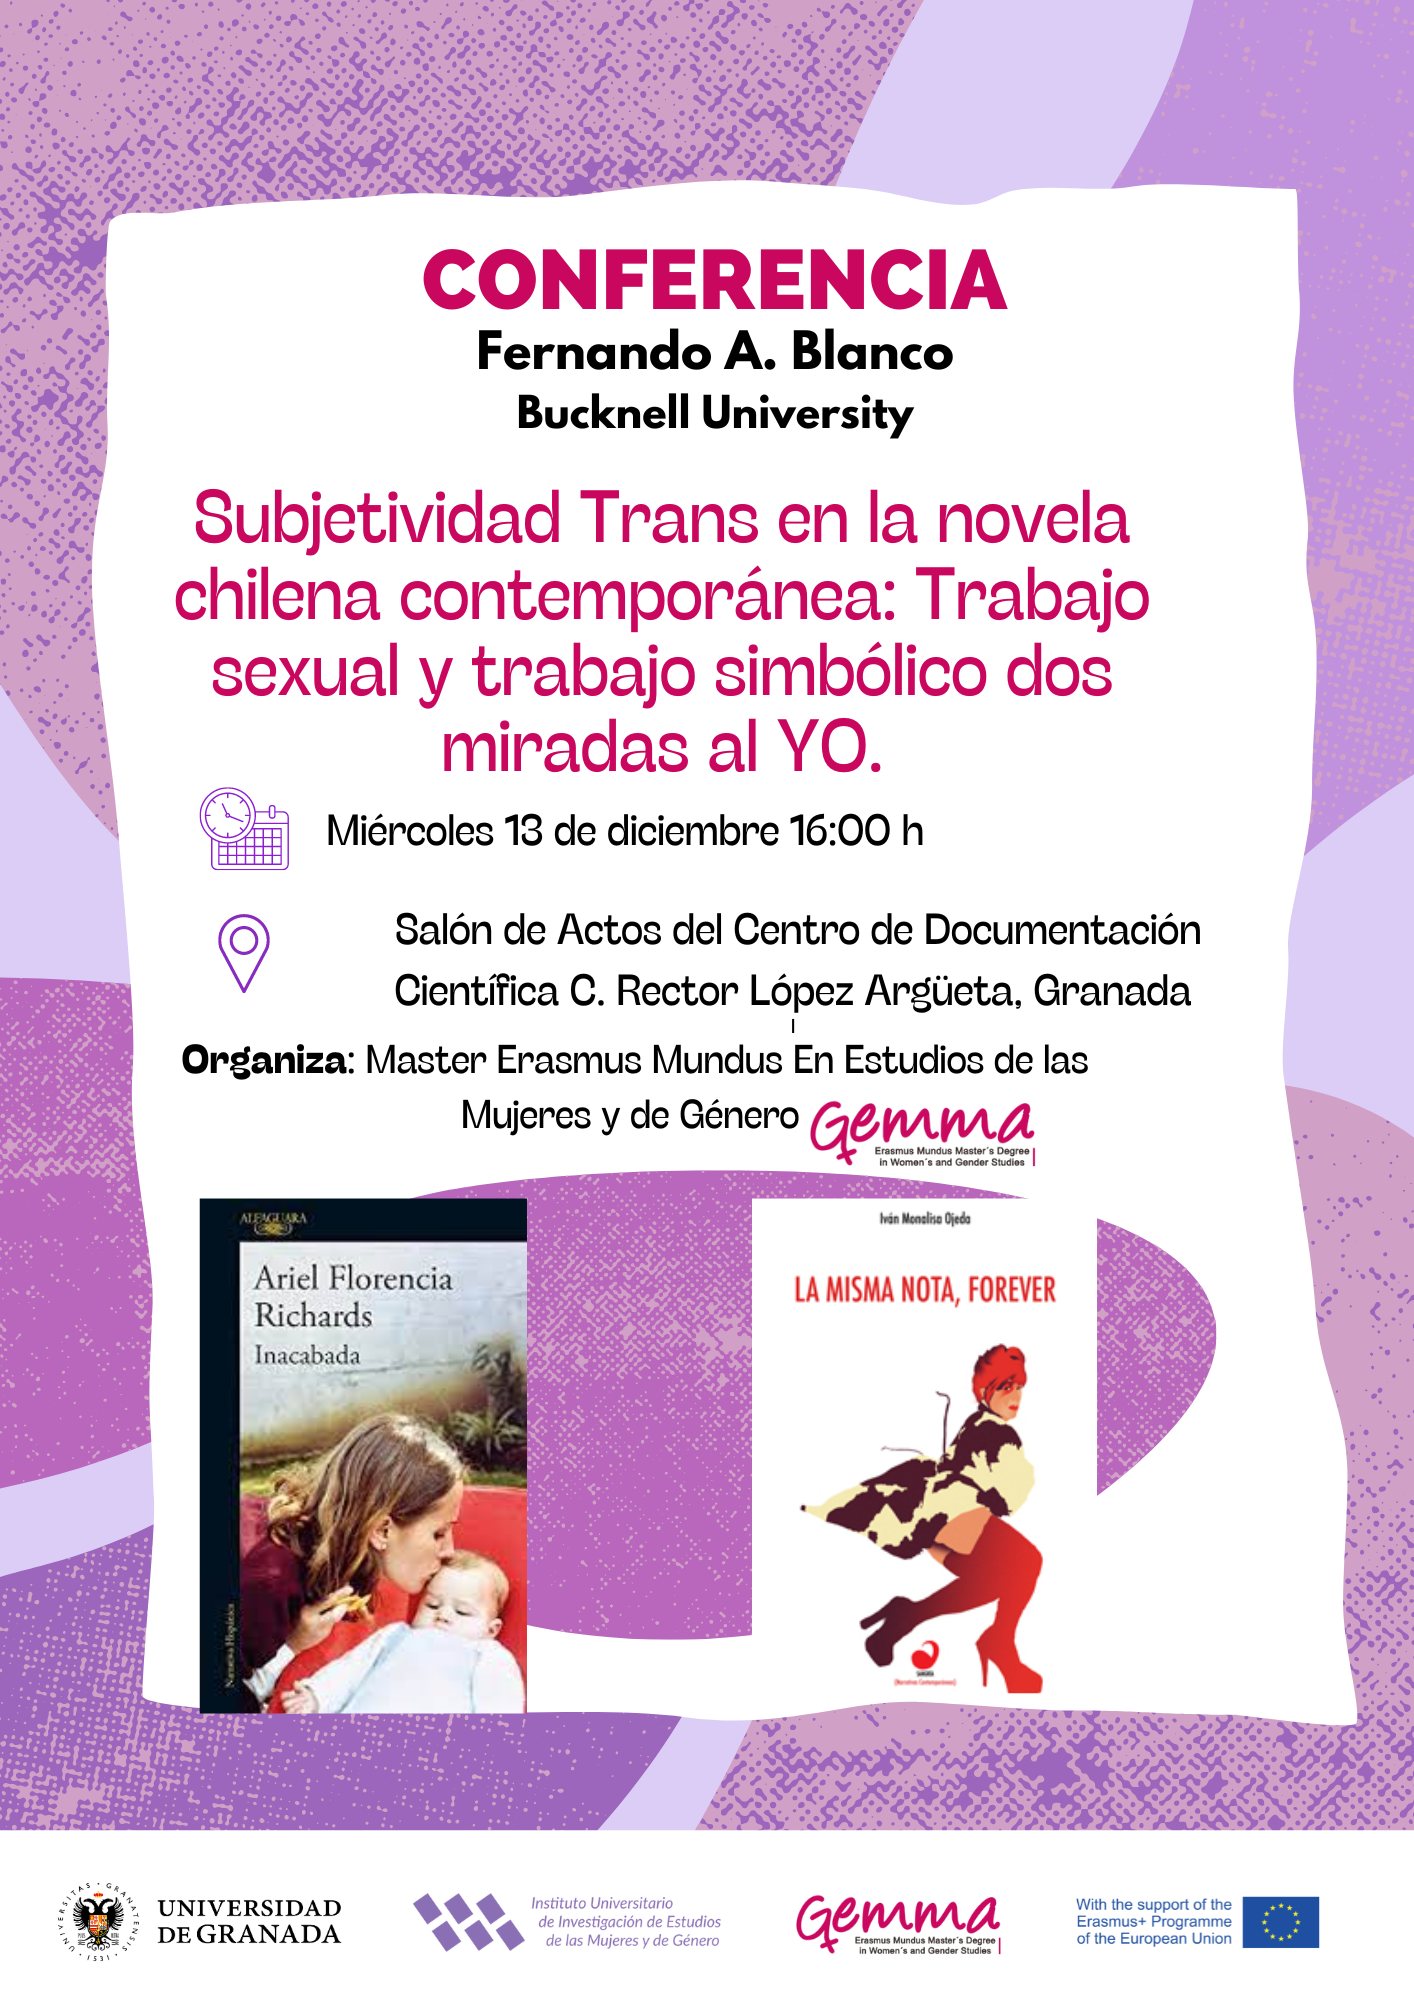 Poster of Fernando Blanco's Conference